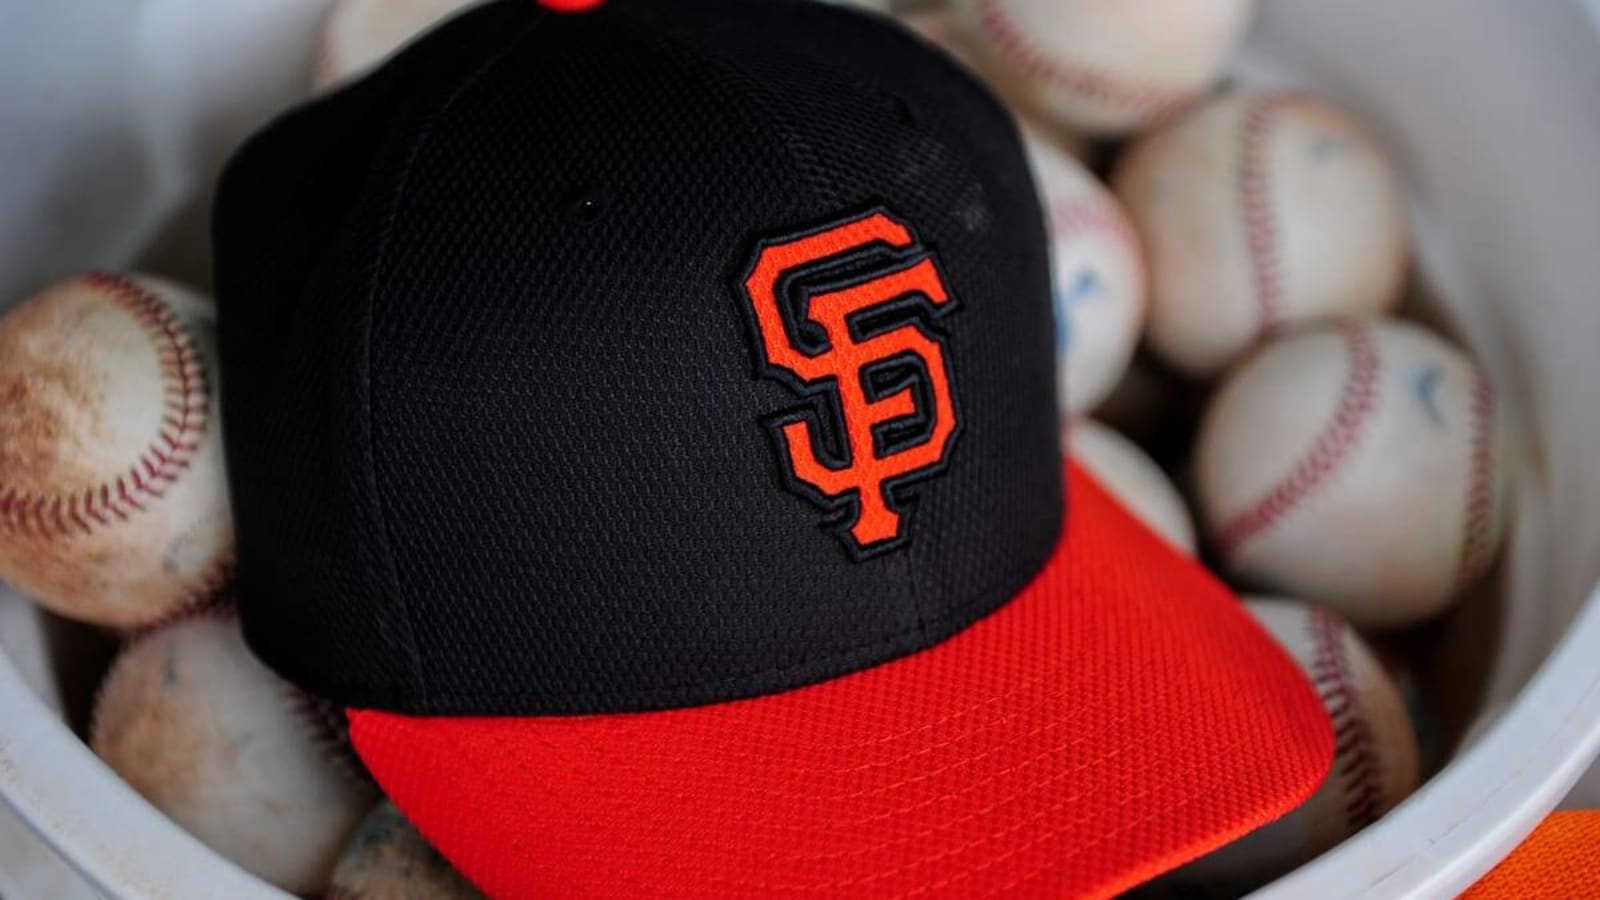  Giants prospects: LHP Chris Wright starts in LF and gets a hit